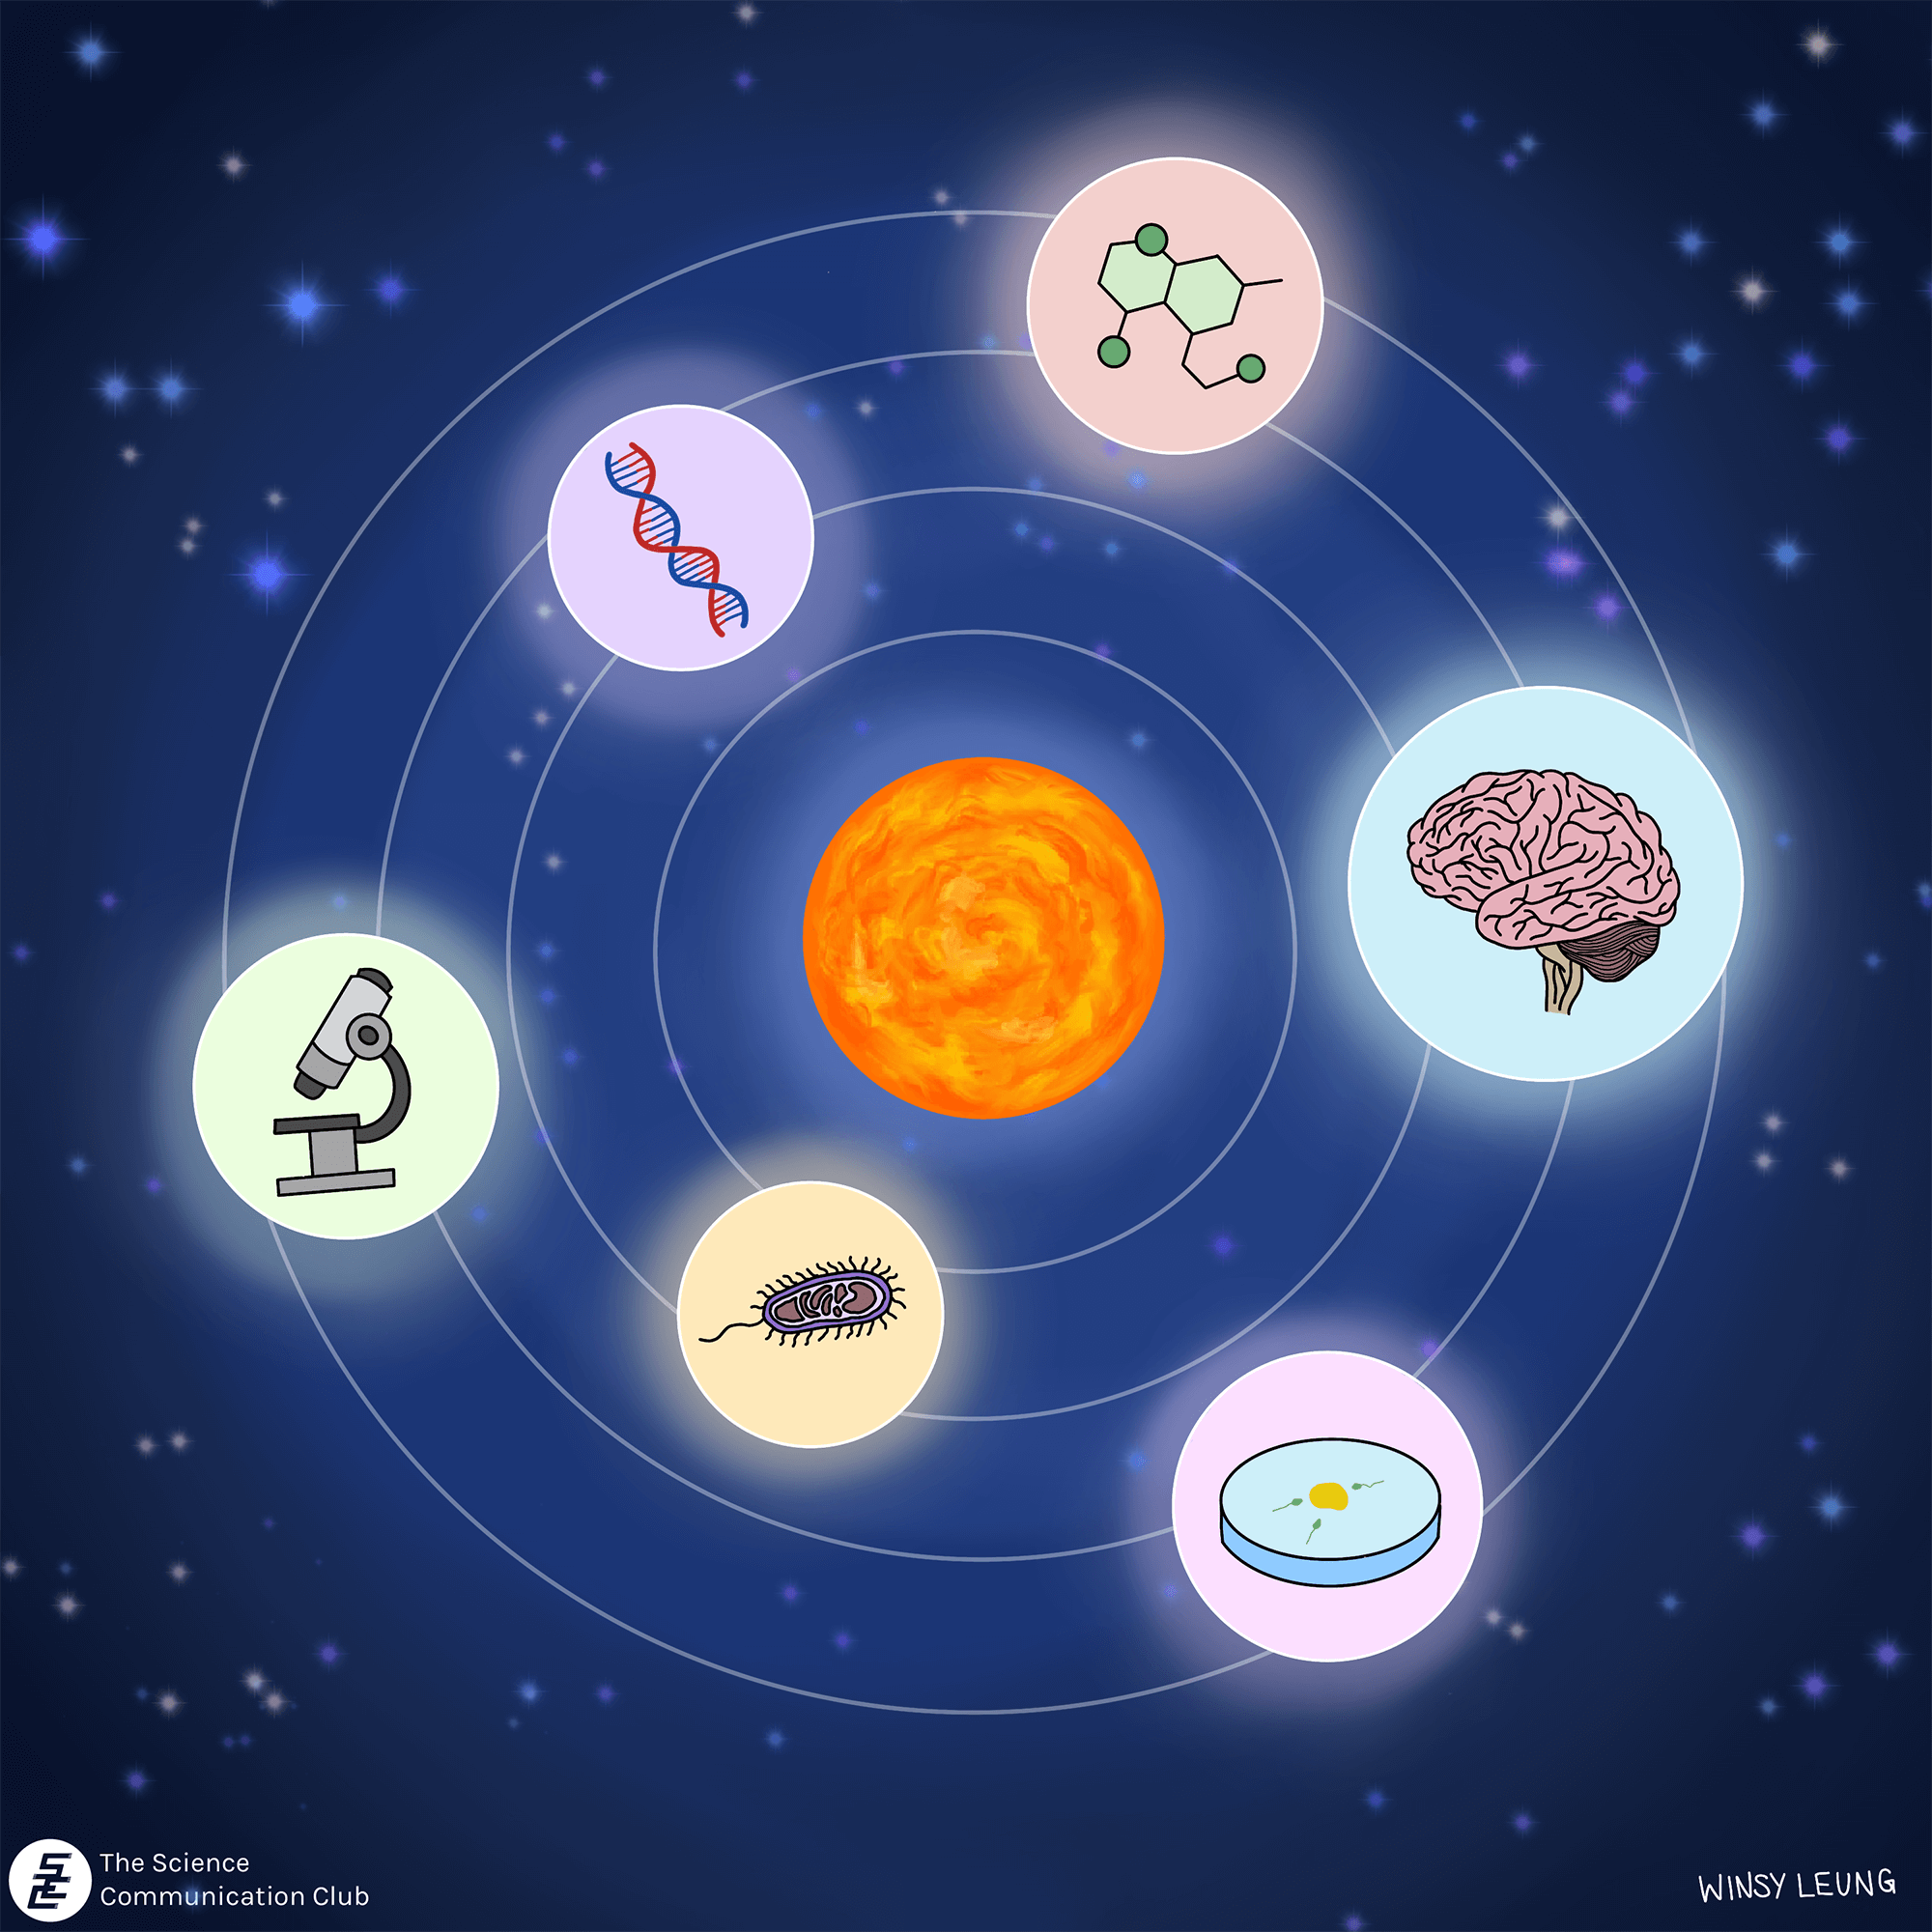 Icons of a strand of DNA, chemical structure, brain, microbe, microscope. and petri dish as planets orbiting around the sun.